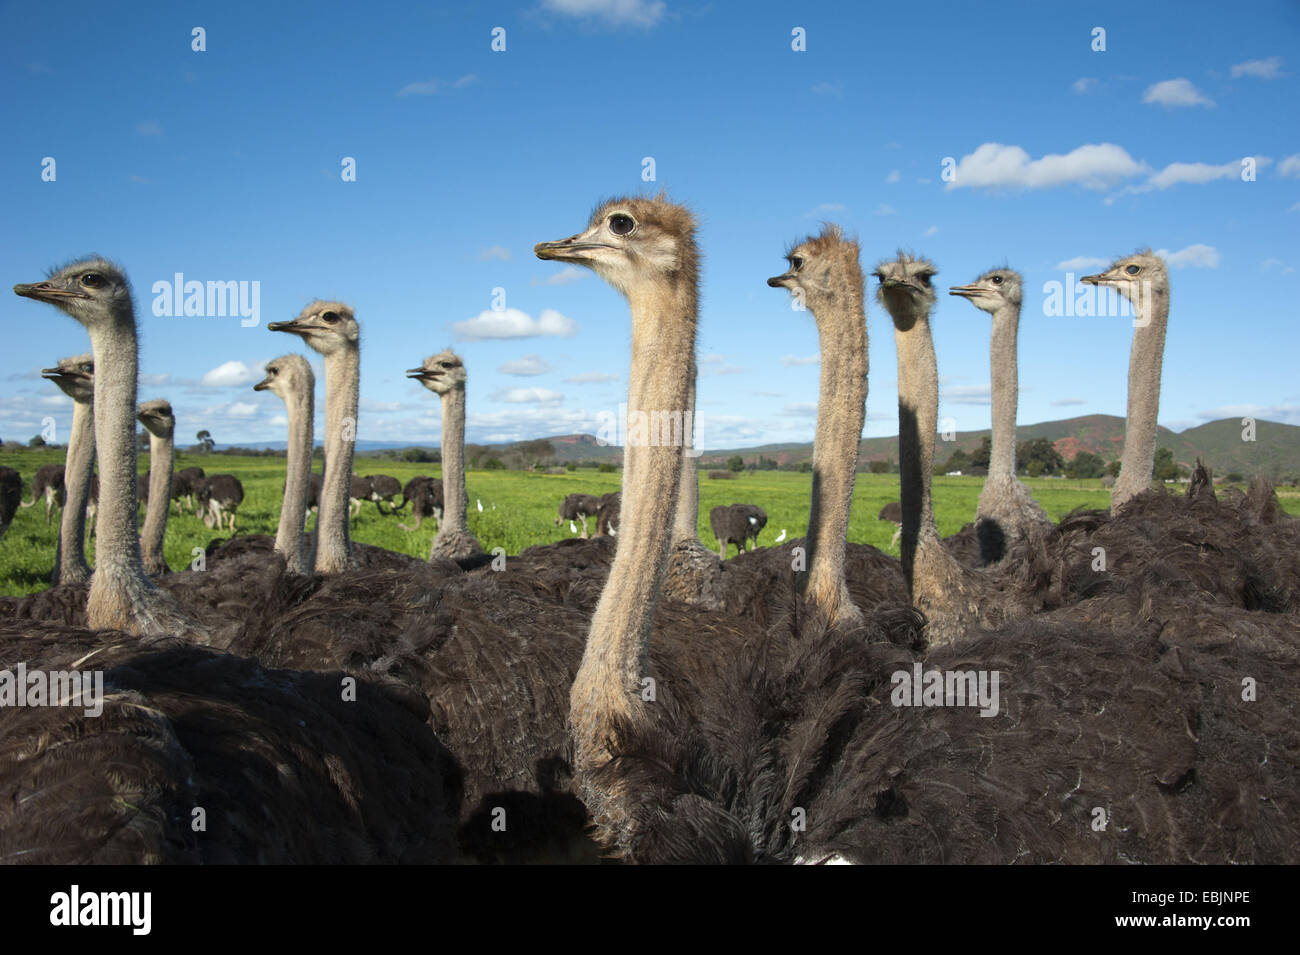 ostrich (Struthio camelus), flock of ostriches, South Africa, Western Cape, Oudtshoorn Stock Photo